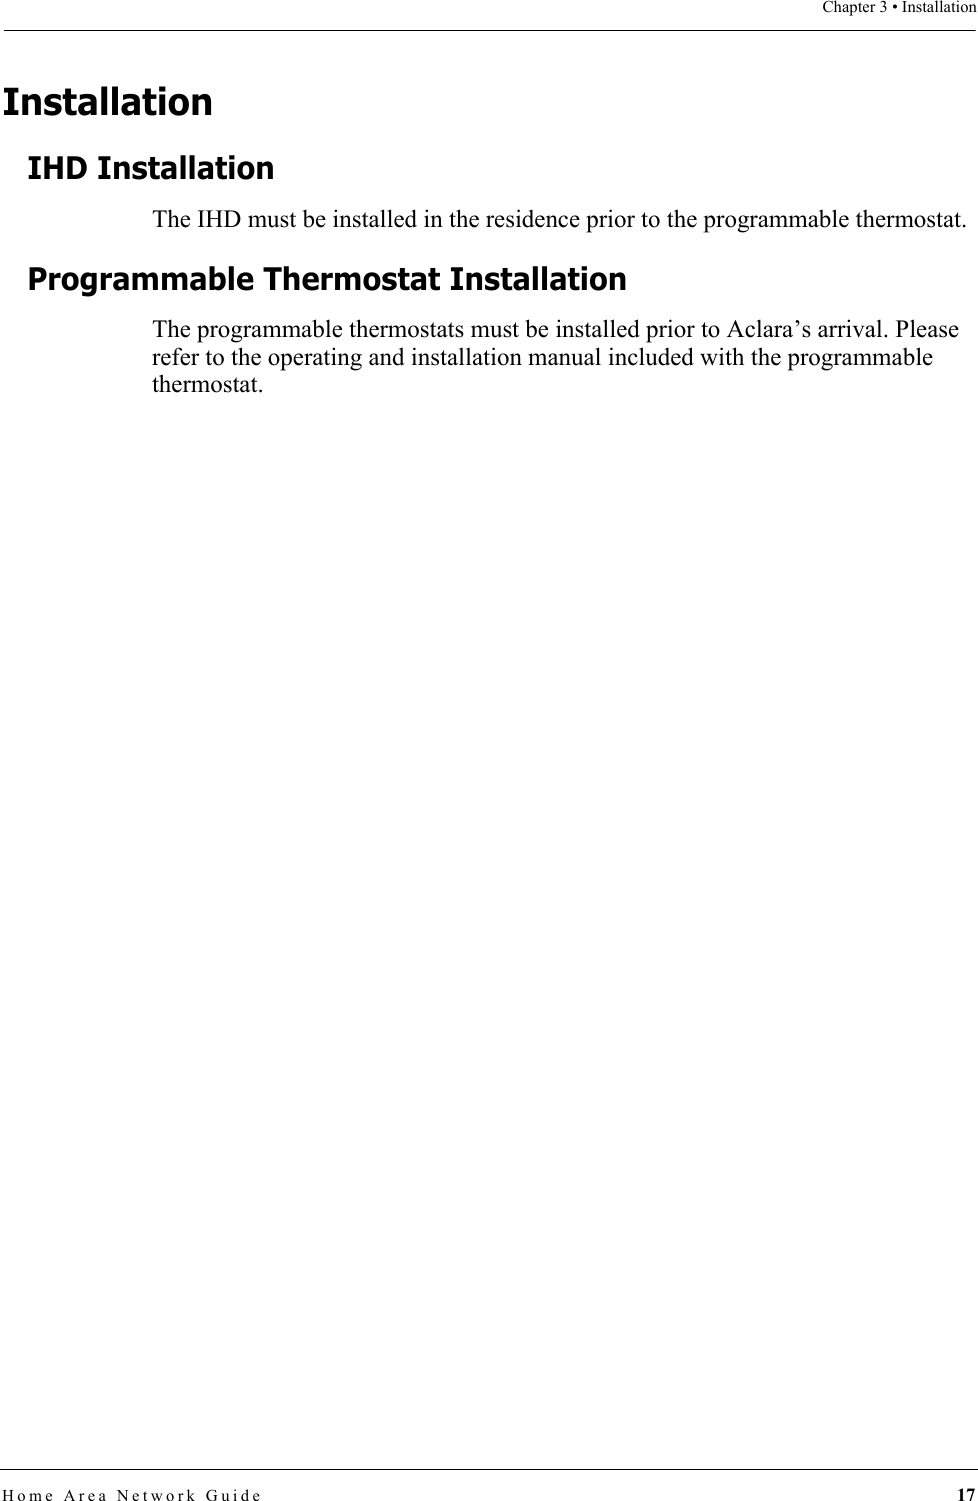 Chapter 3 • InstallationHome Area Network Guide 17InstallationIHD InstallationThe IHD must be installed in the residence prior to the programmable thermostat.Programmable Thermostat InstallationThe programmable thermostats must be installed prior to Aclara’s arrival. Please refer to the operating and installation manual included with the programmable thermostat.